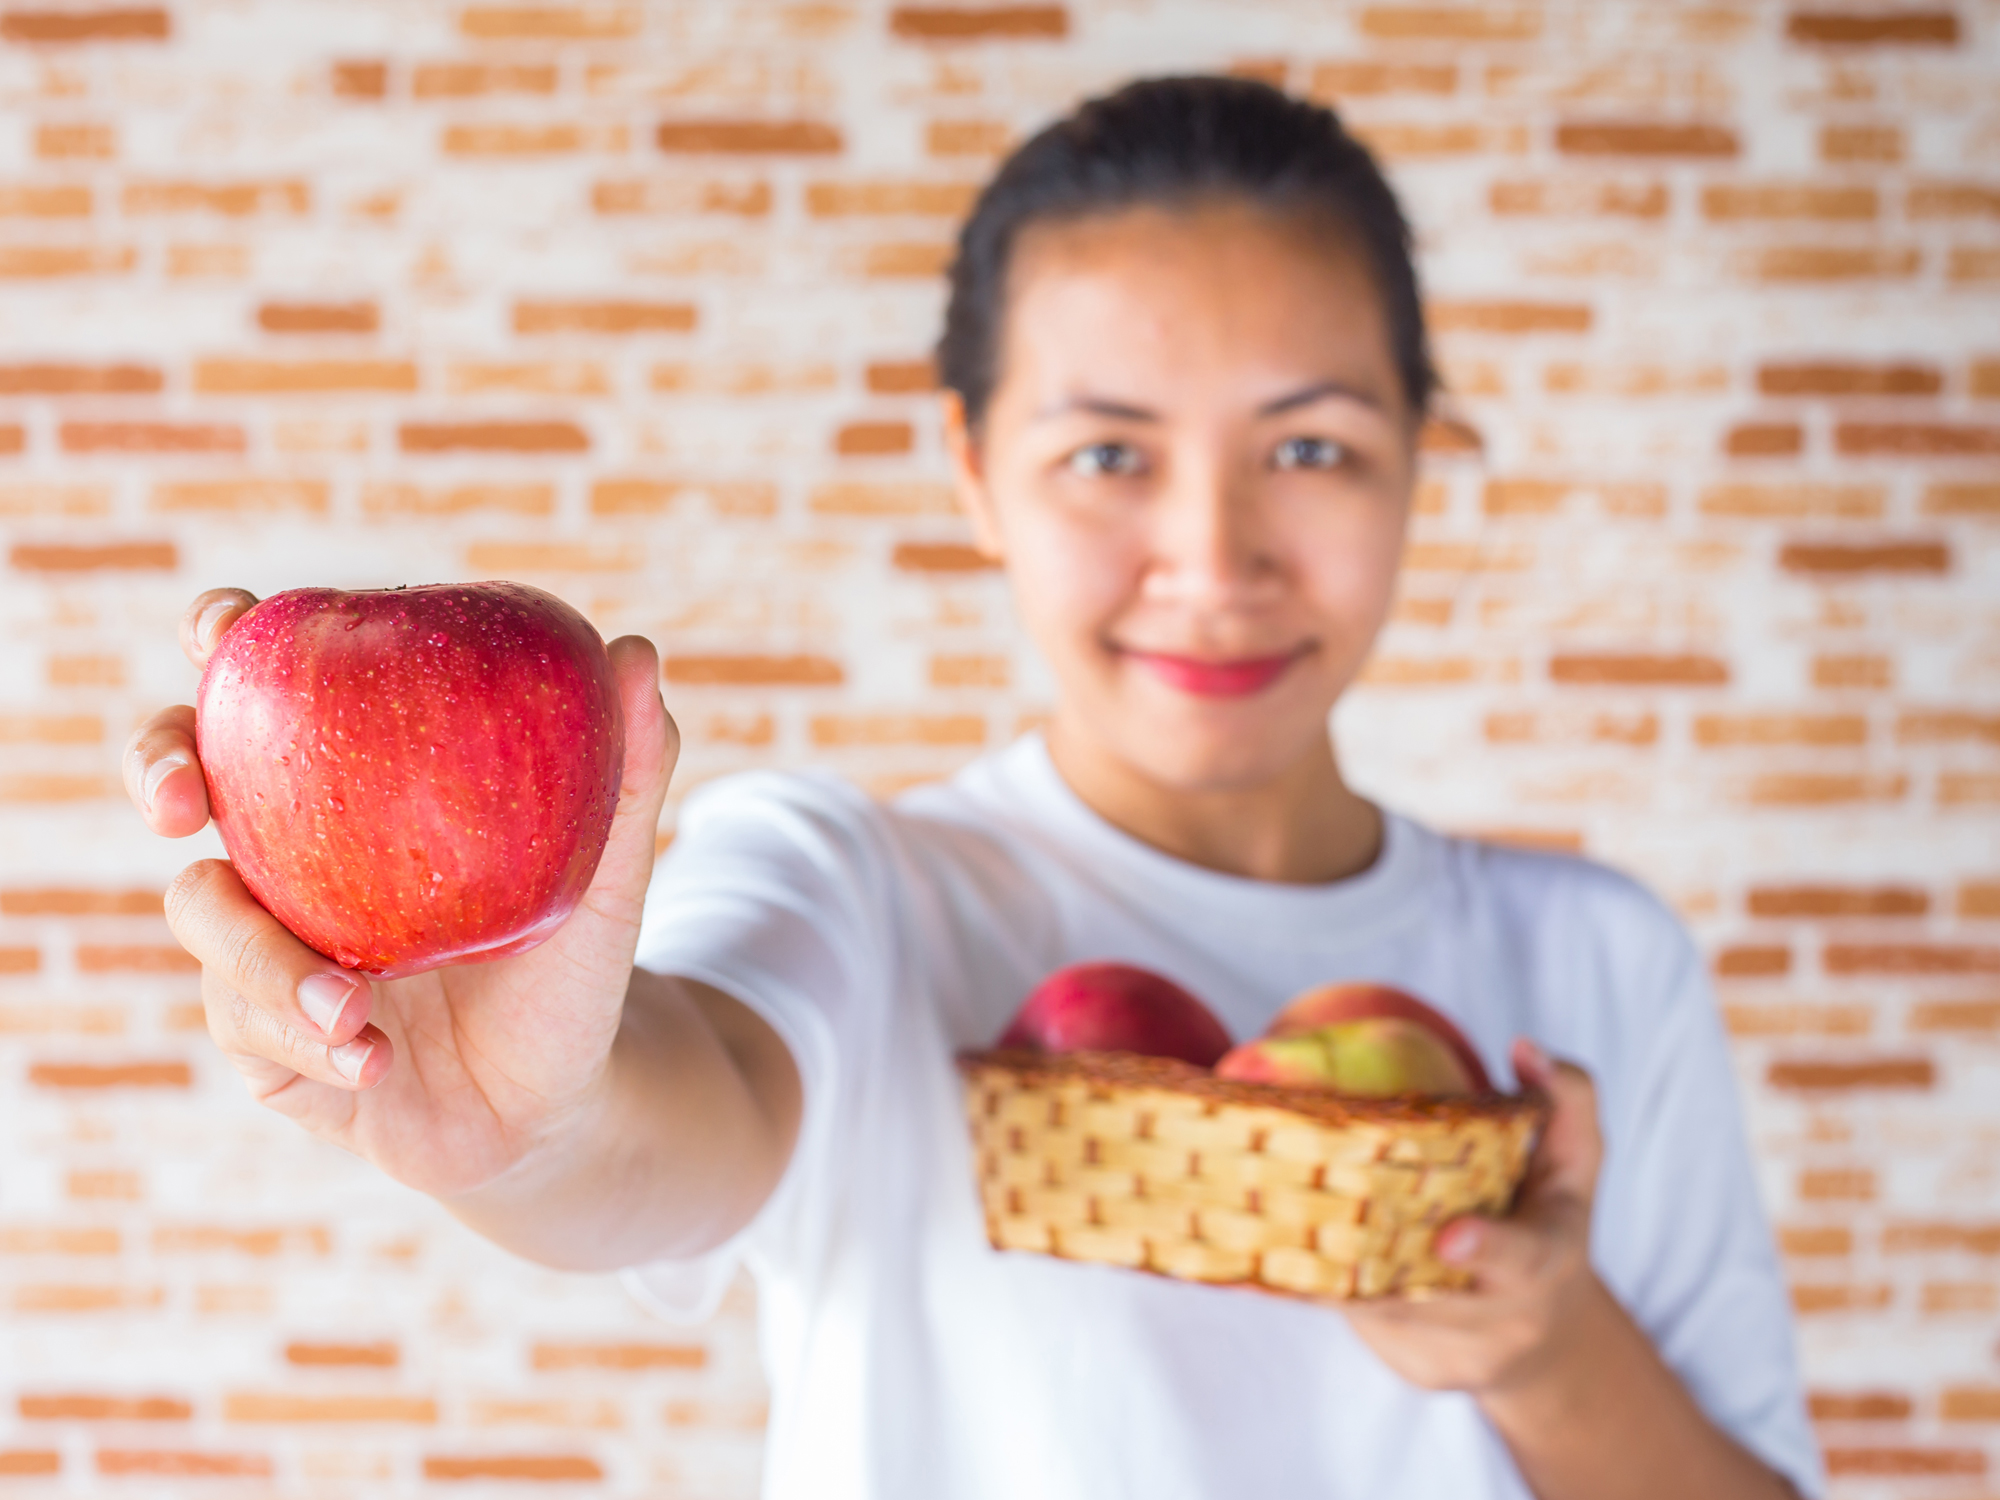 If you have an apple body shape, here’s why and what to do